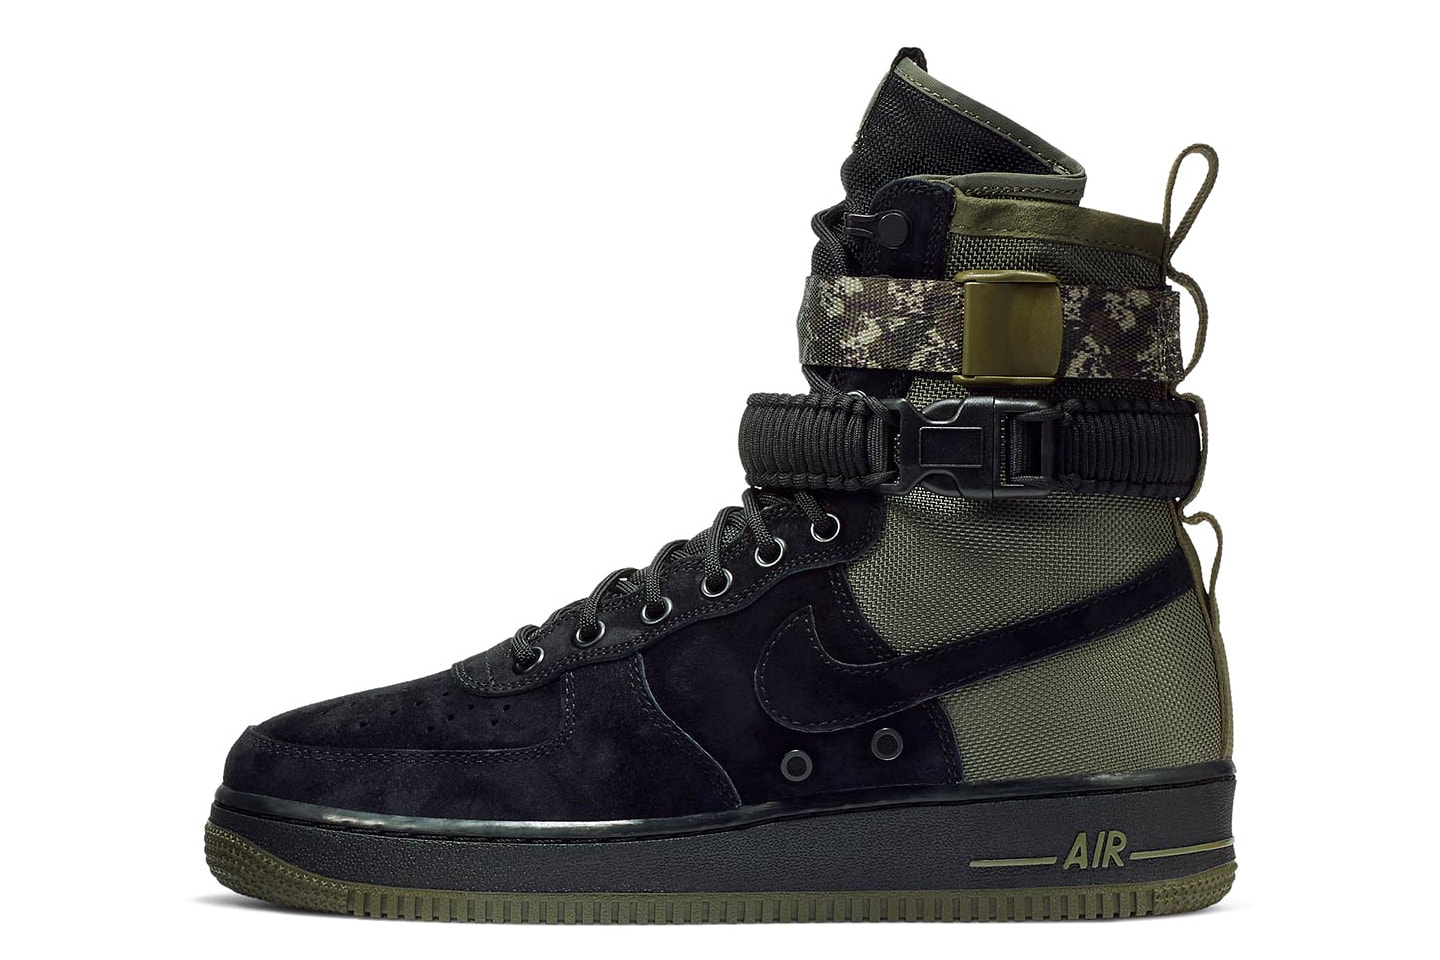 Nike SF AF1 Camo Strap olive black may 2018 release date info drop sneakers shoes footwear